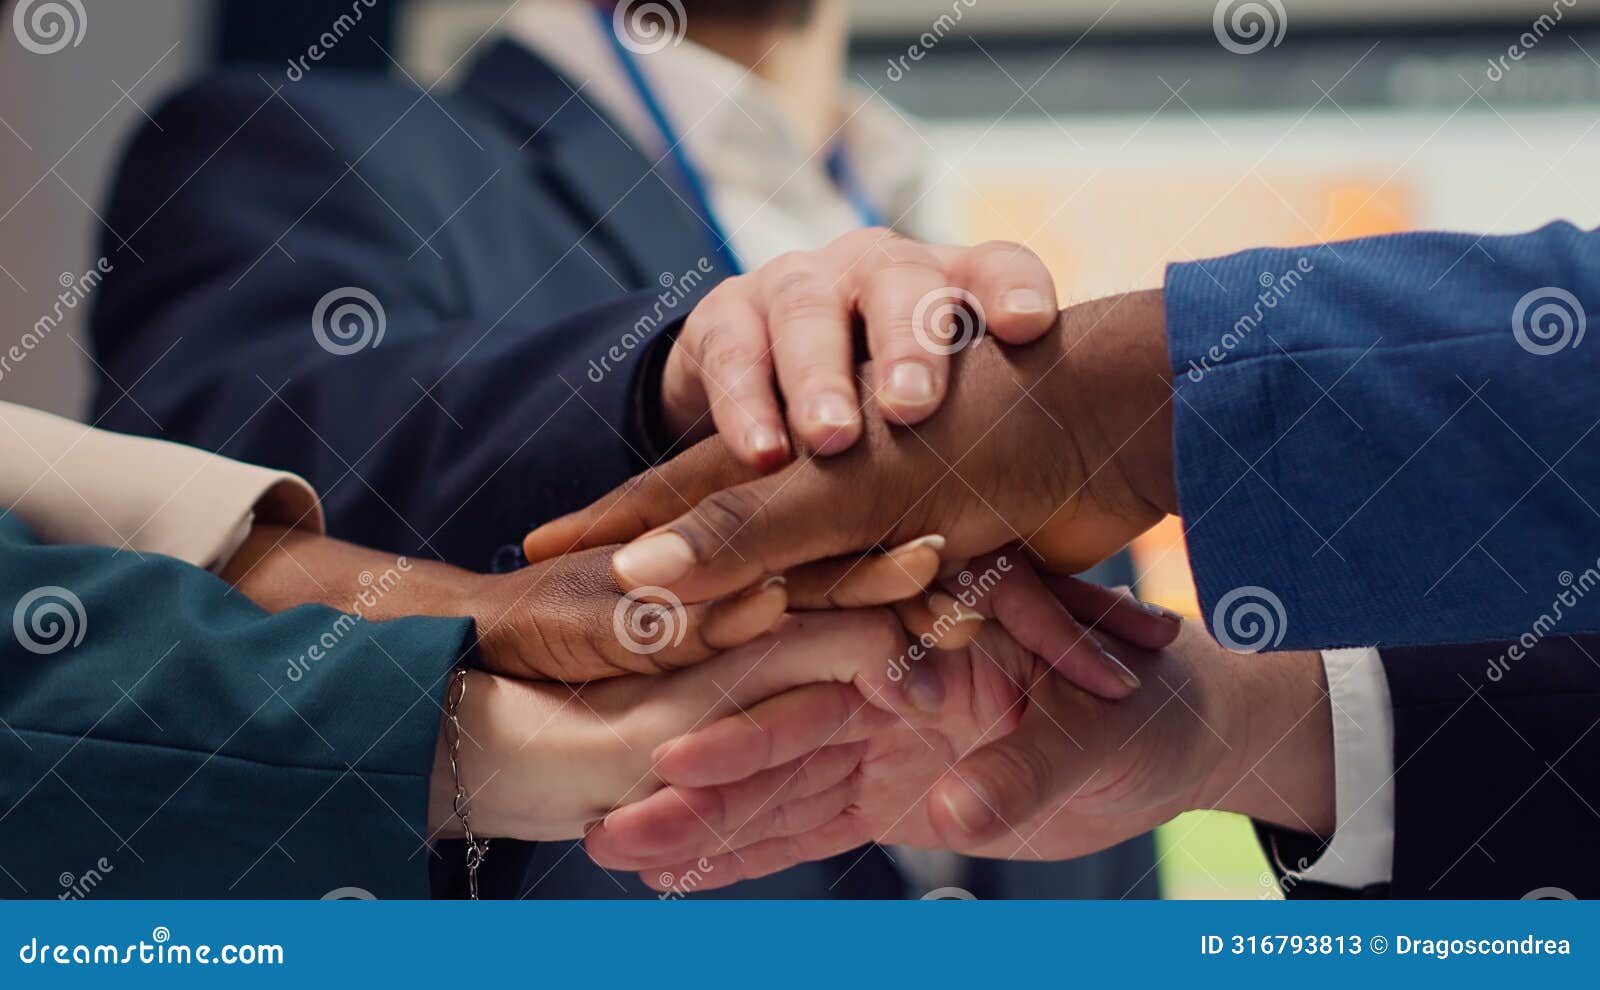 business affiliates connecting hands and raising them up in celebration